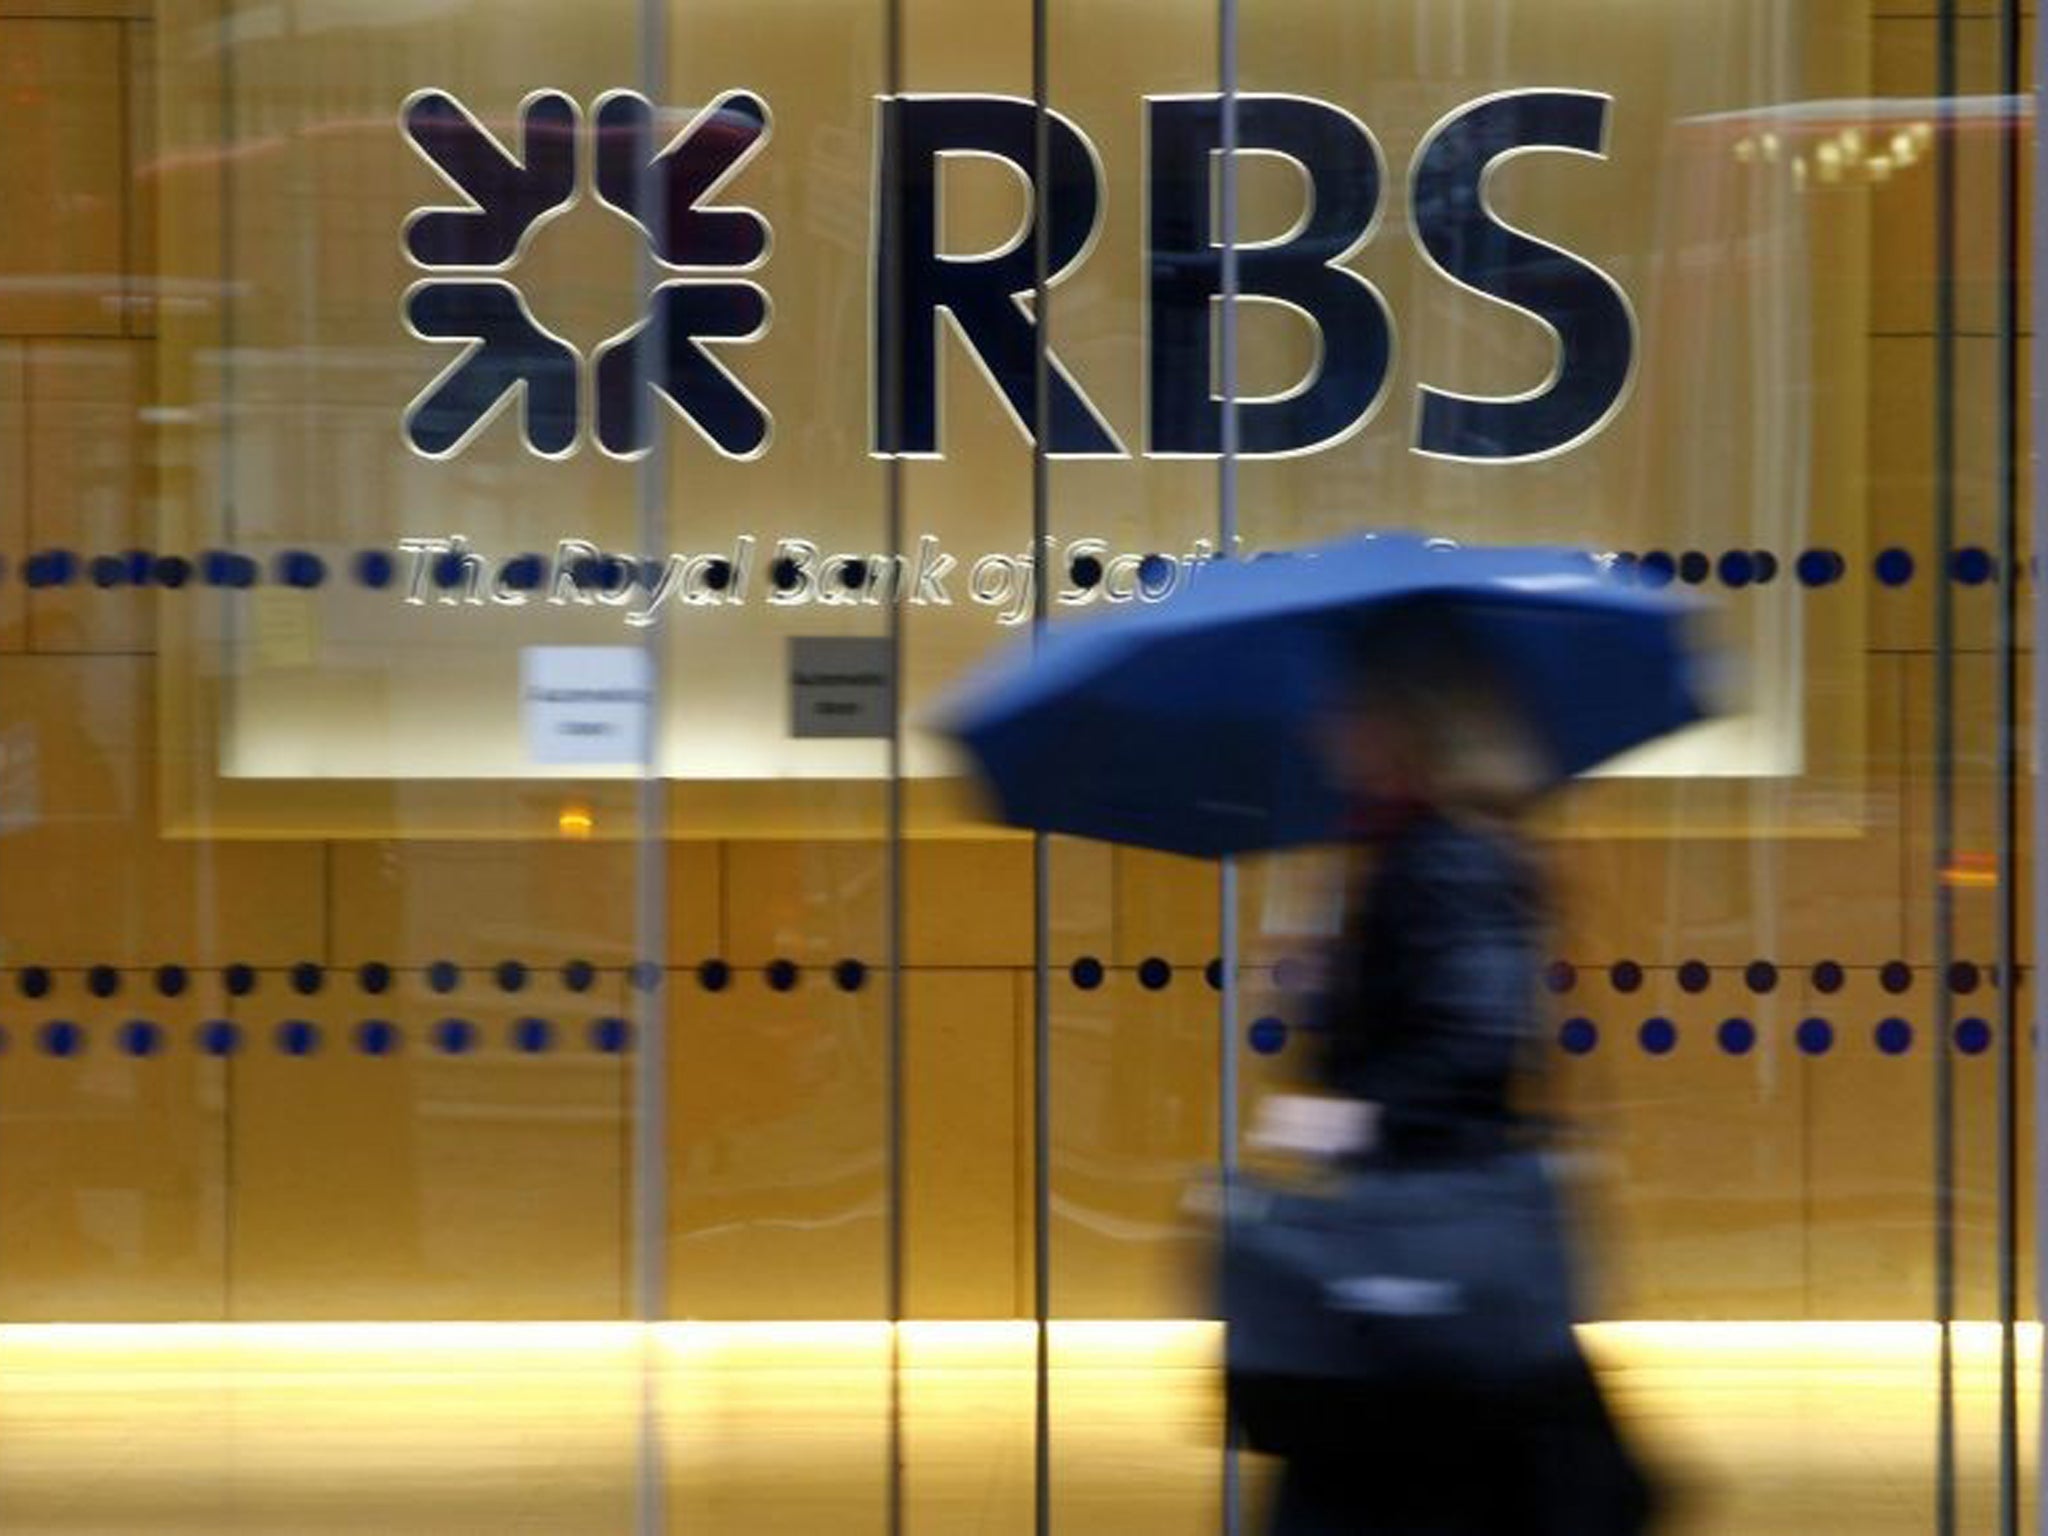 The RBS banking group apologised to its customers last night after customers were unable to access accounts or withdraw money